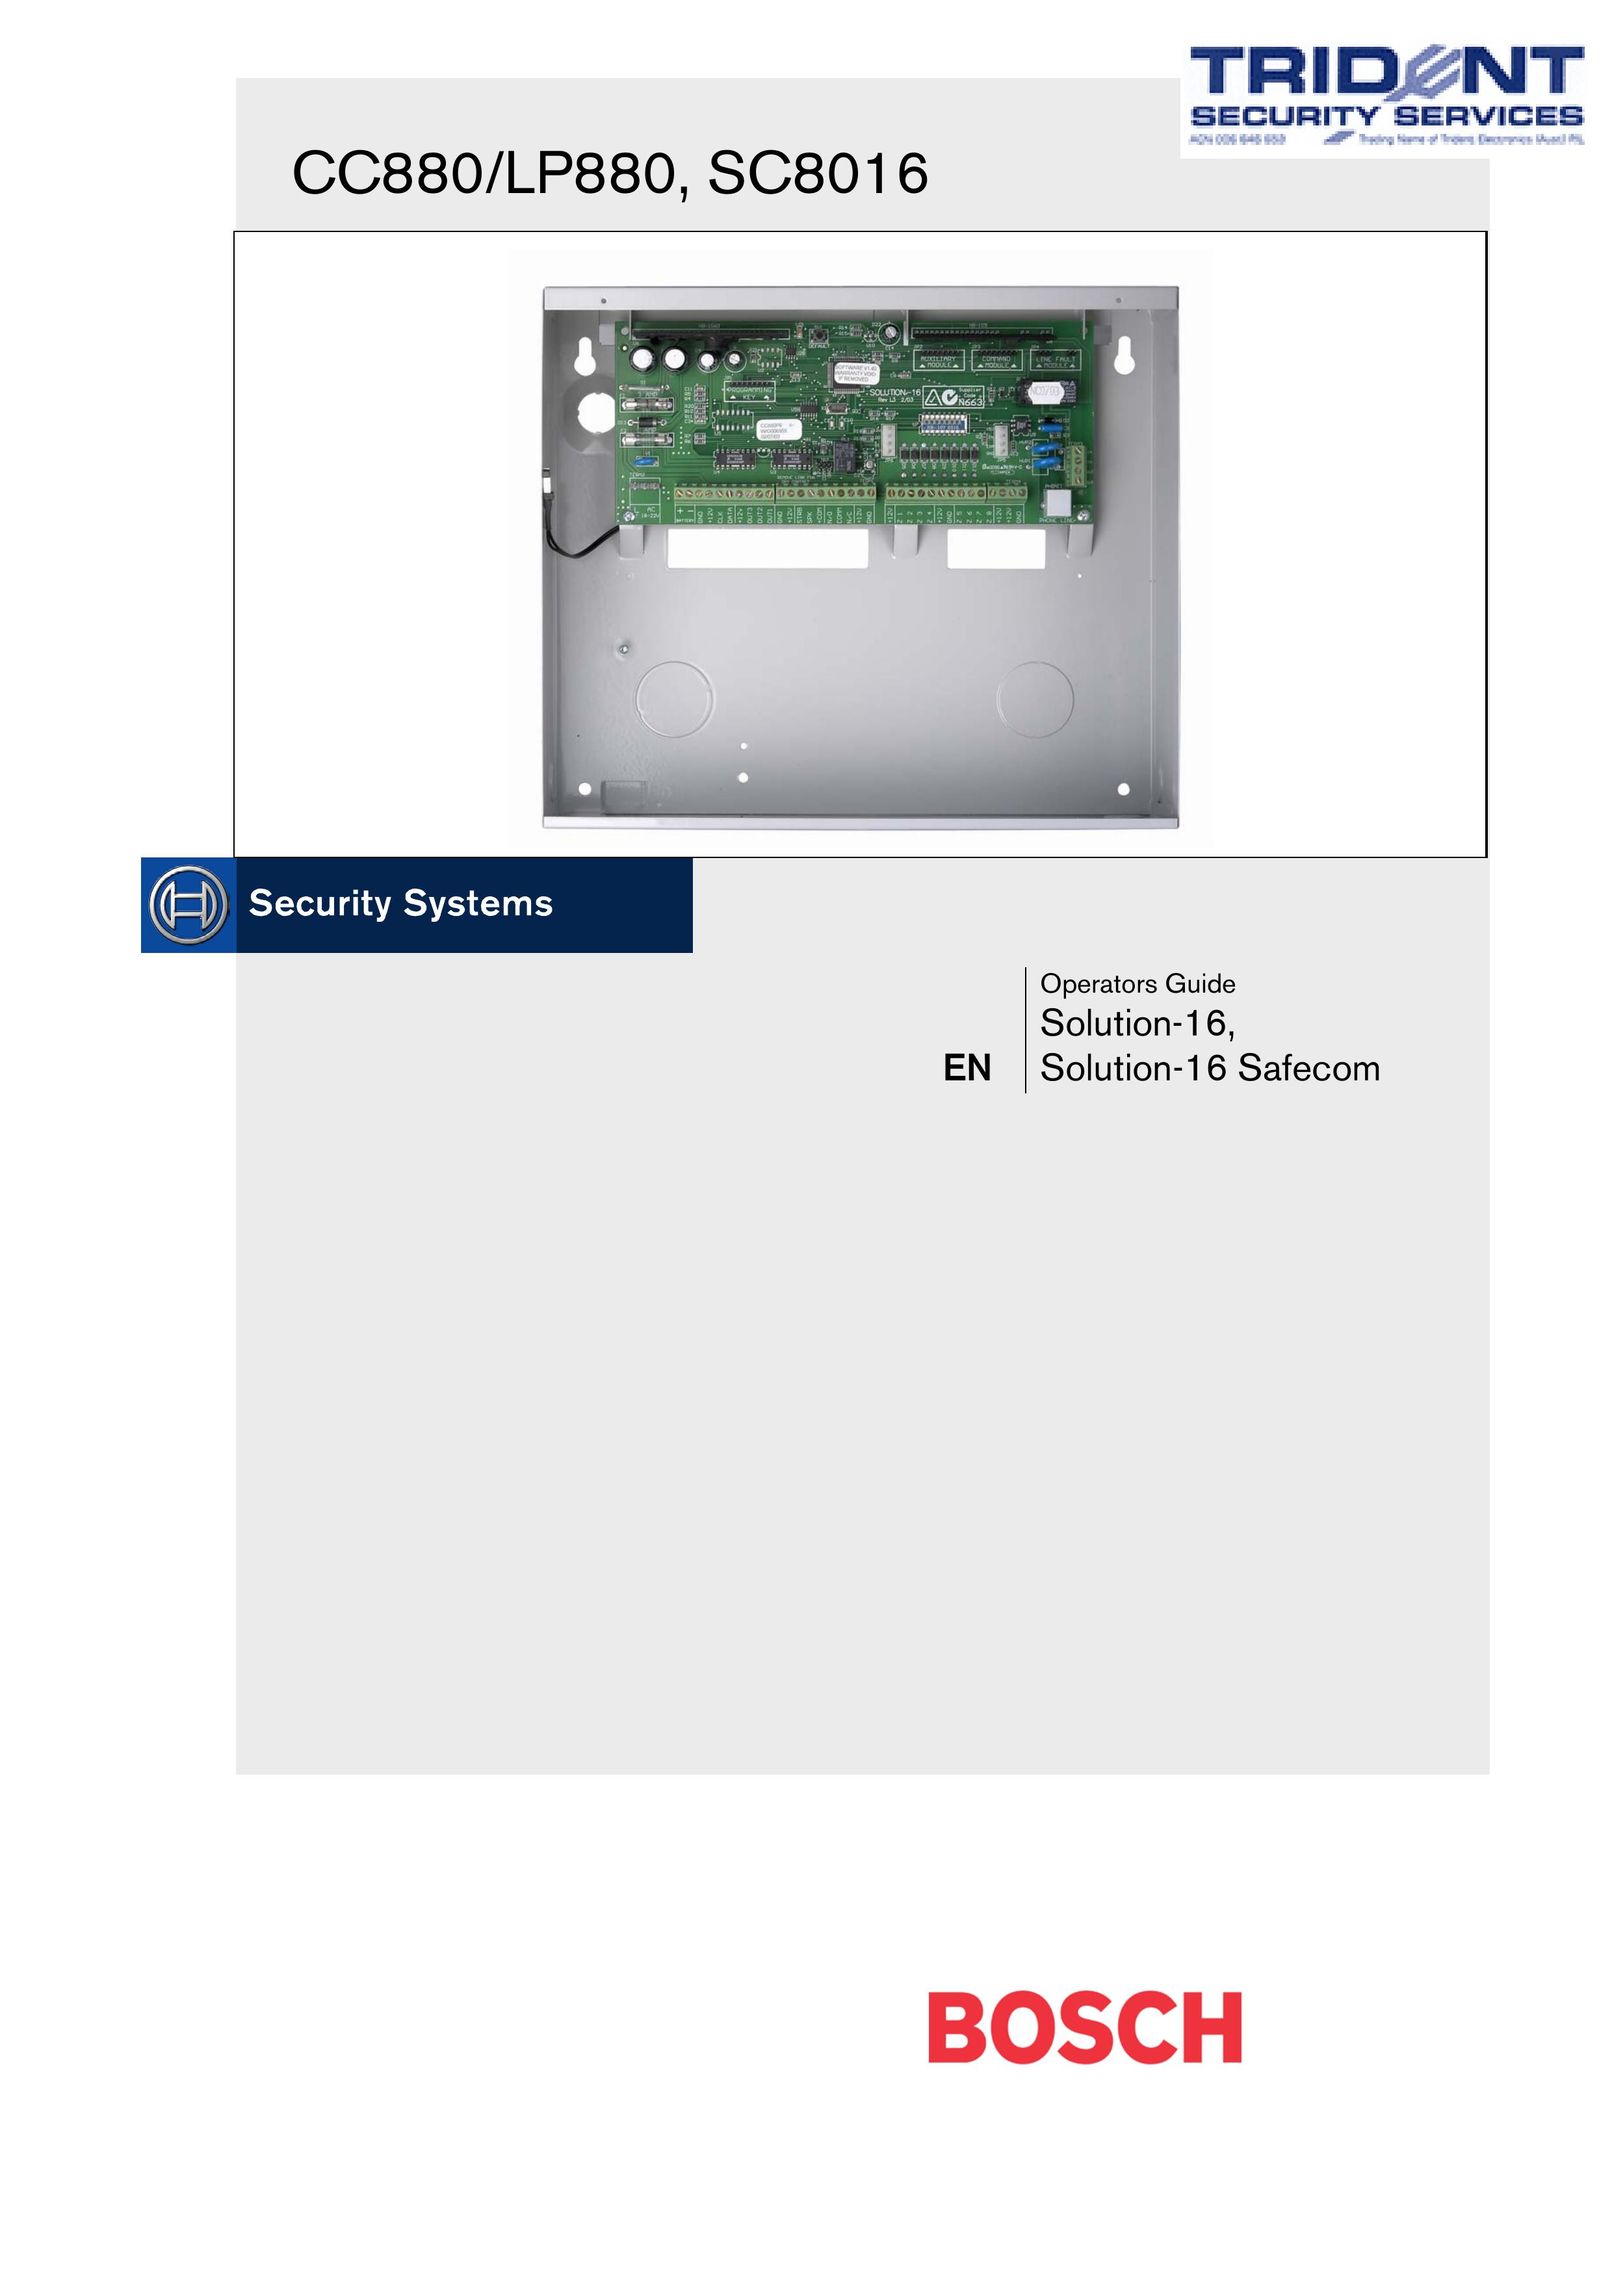 Bosch Appliances CC880 Home Security System User Manual